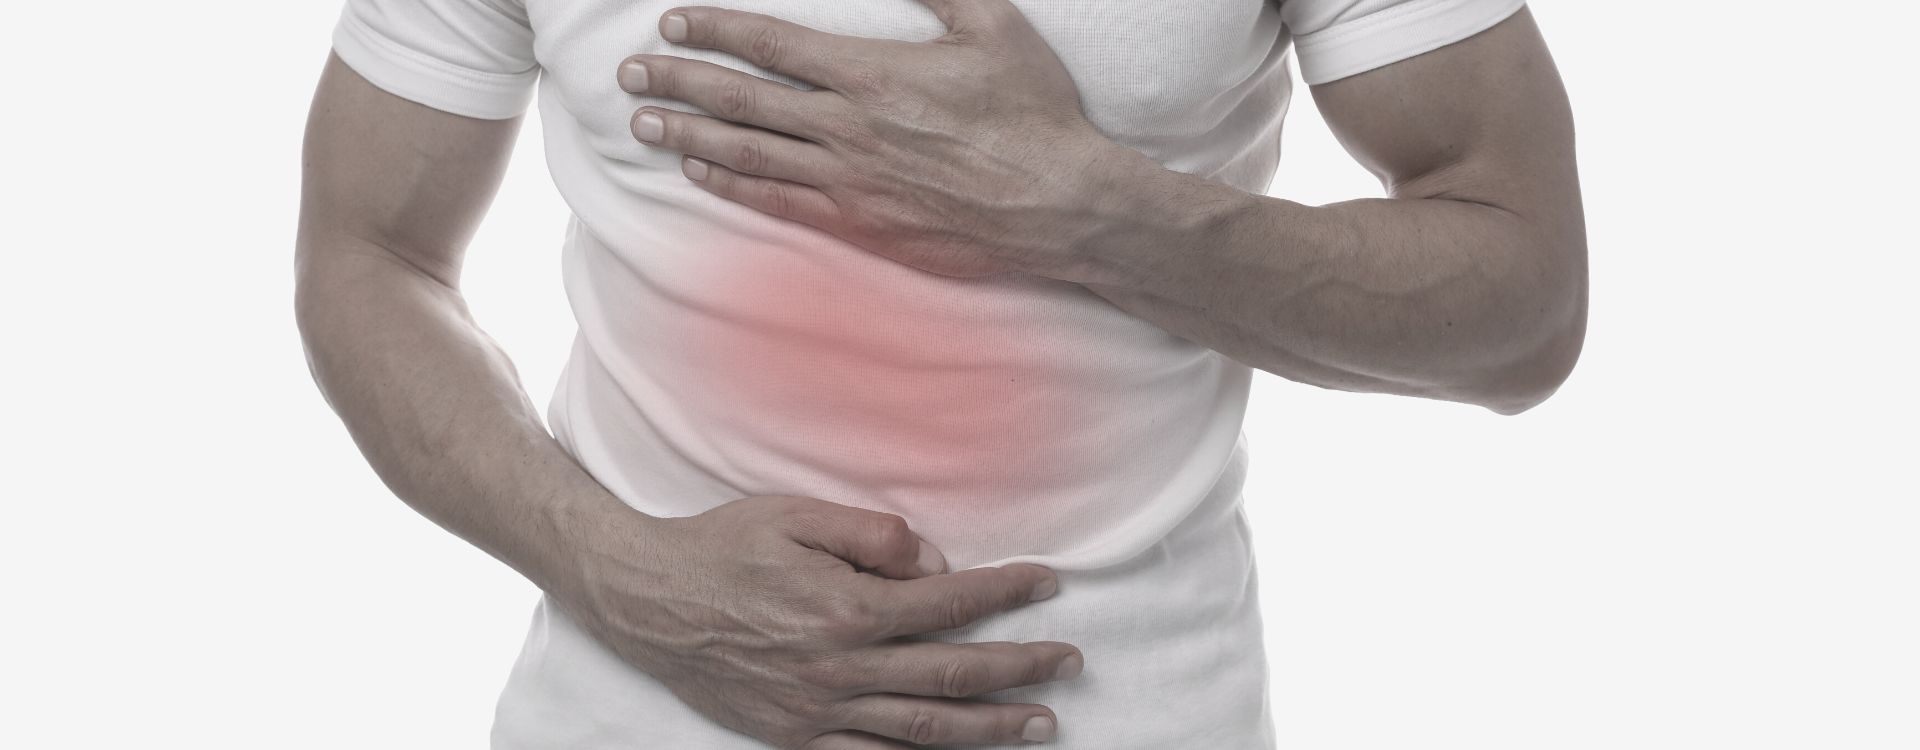 Person suffering from the symptoms of dyspepsia